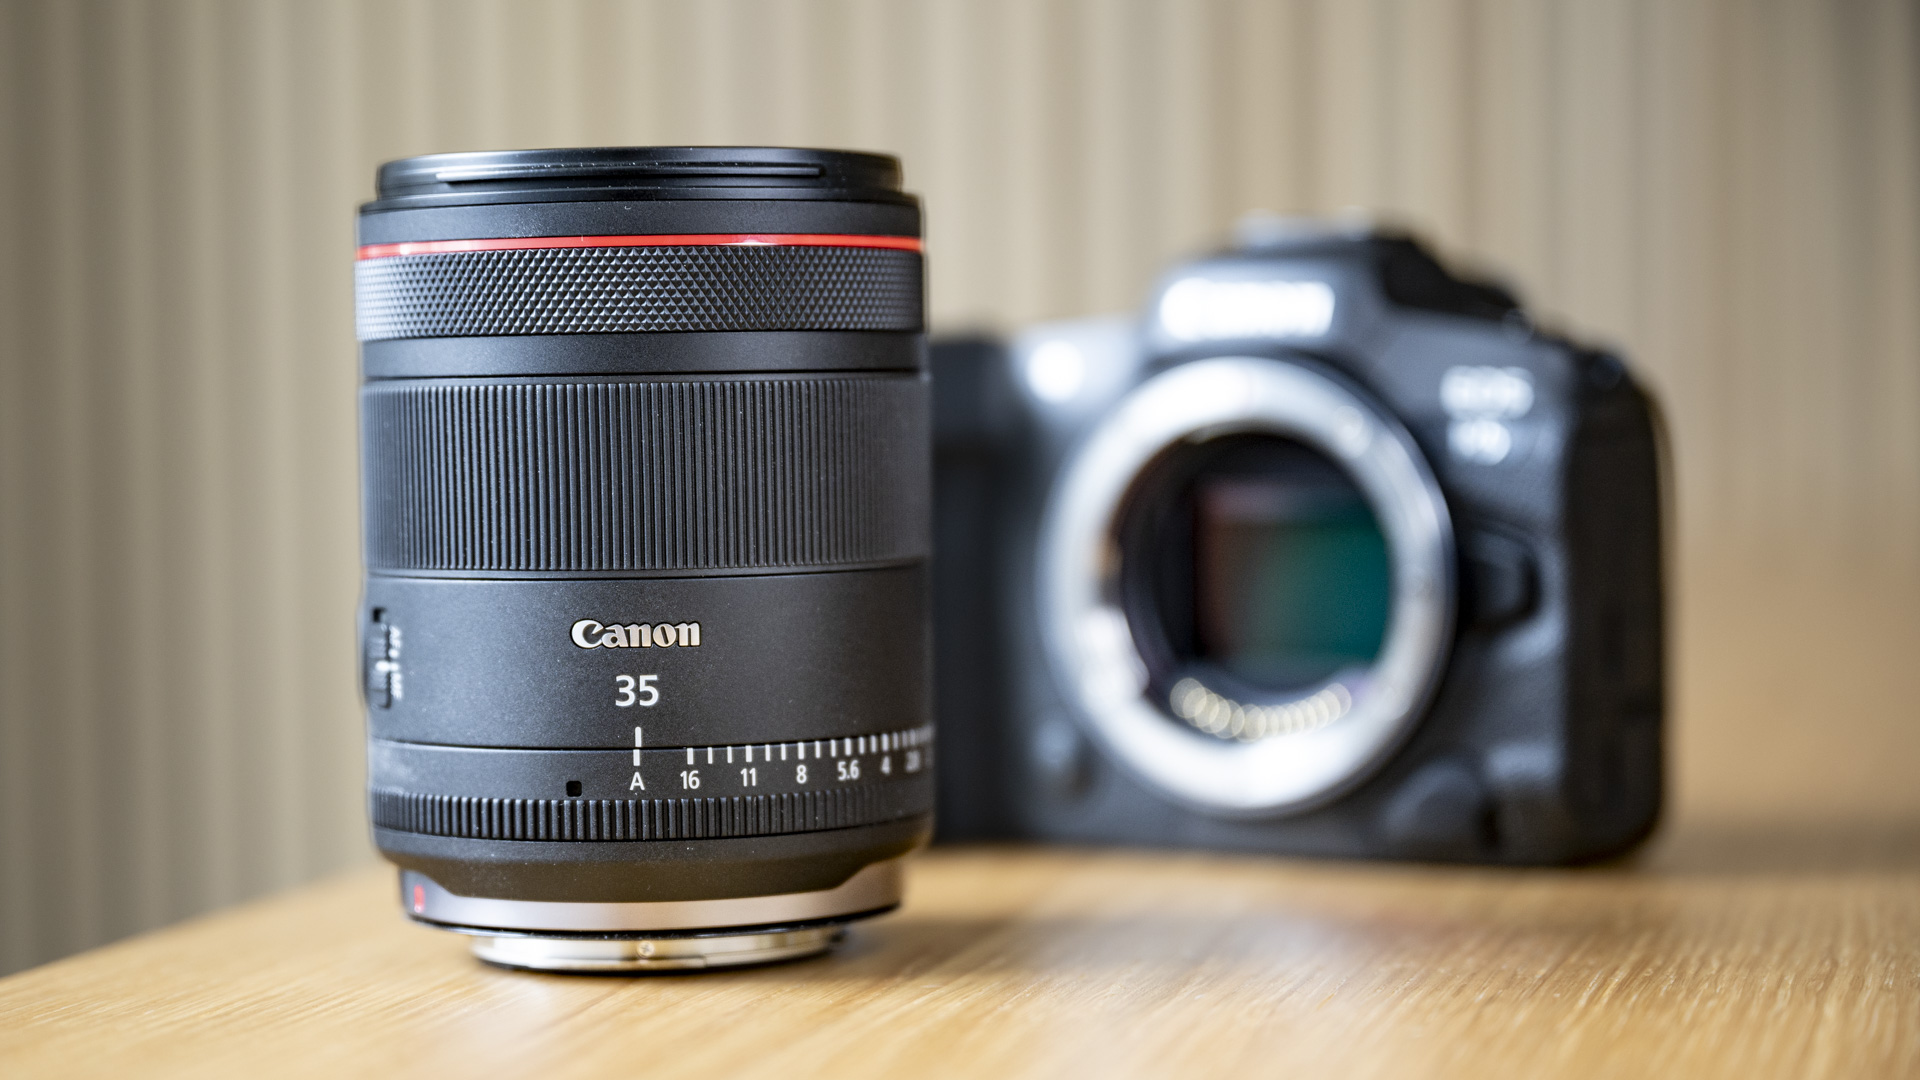 The Canon RF 35mm F1.4 lens on a wooden table in front of a Canon EOS R5